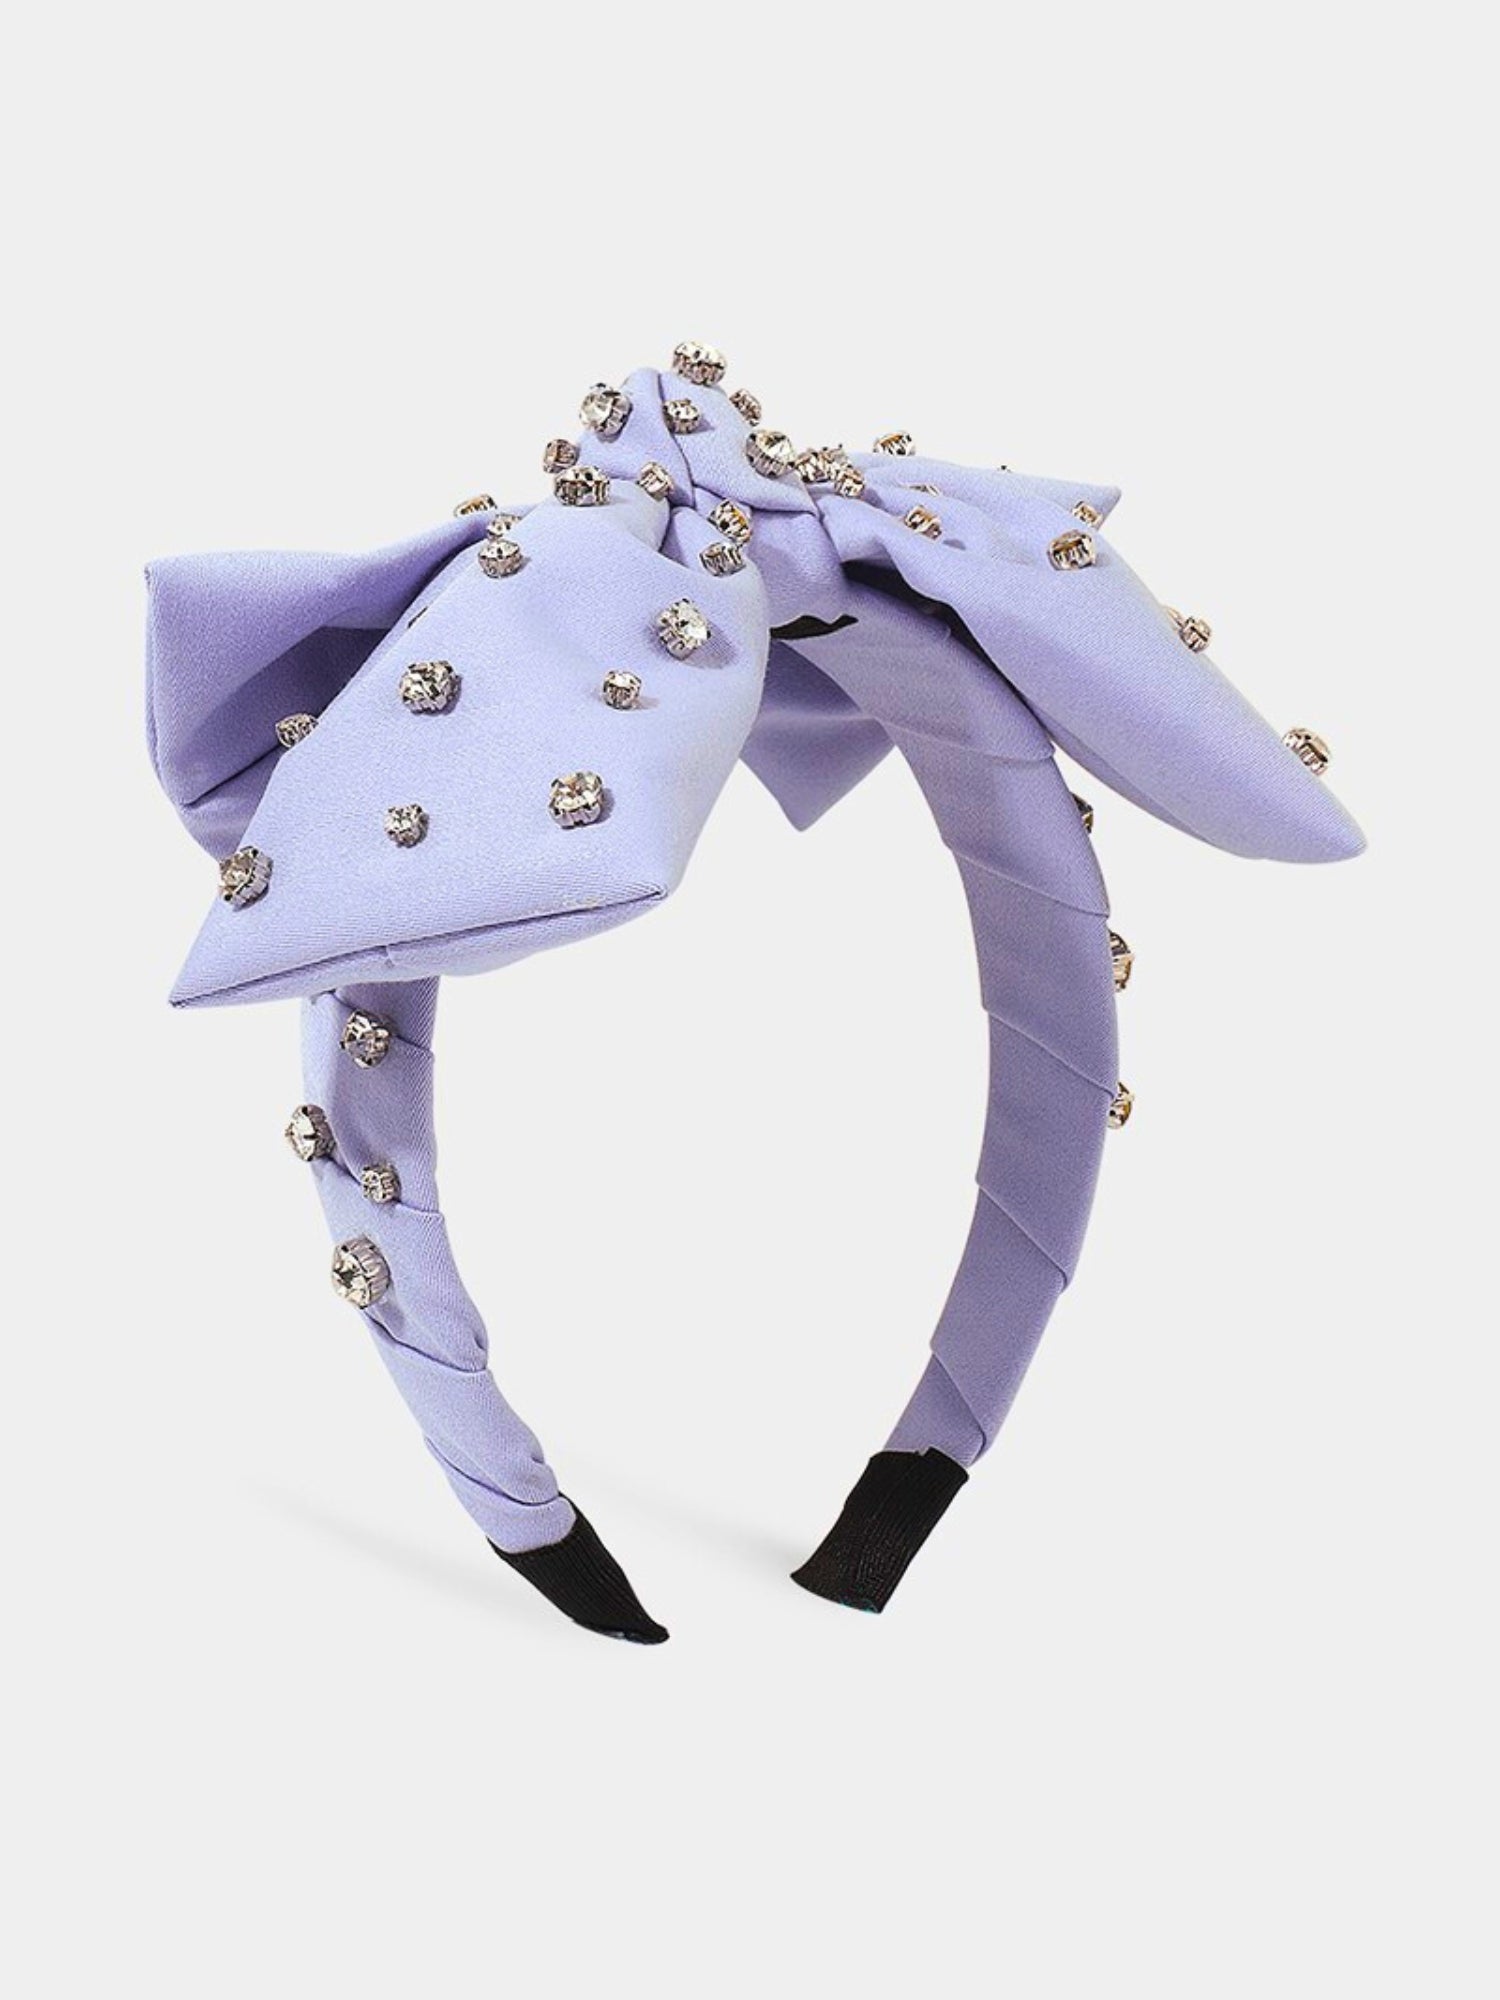 The Lavender Bow Headband - Lavender, Bows, Crystals, ah all the details we love! The Lavender Bow headband is made with a medium sized band that is comfortable and easy to wear, but the best detail is the giant bow that sits on top of your head, it featu